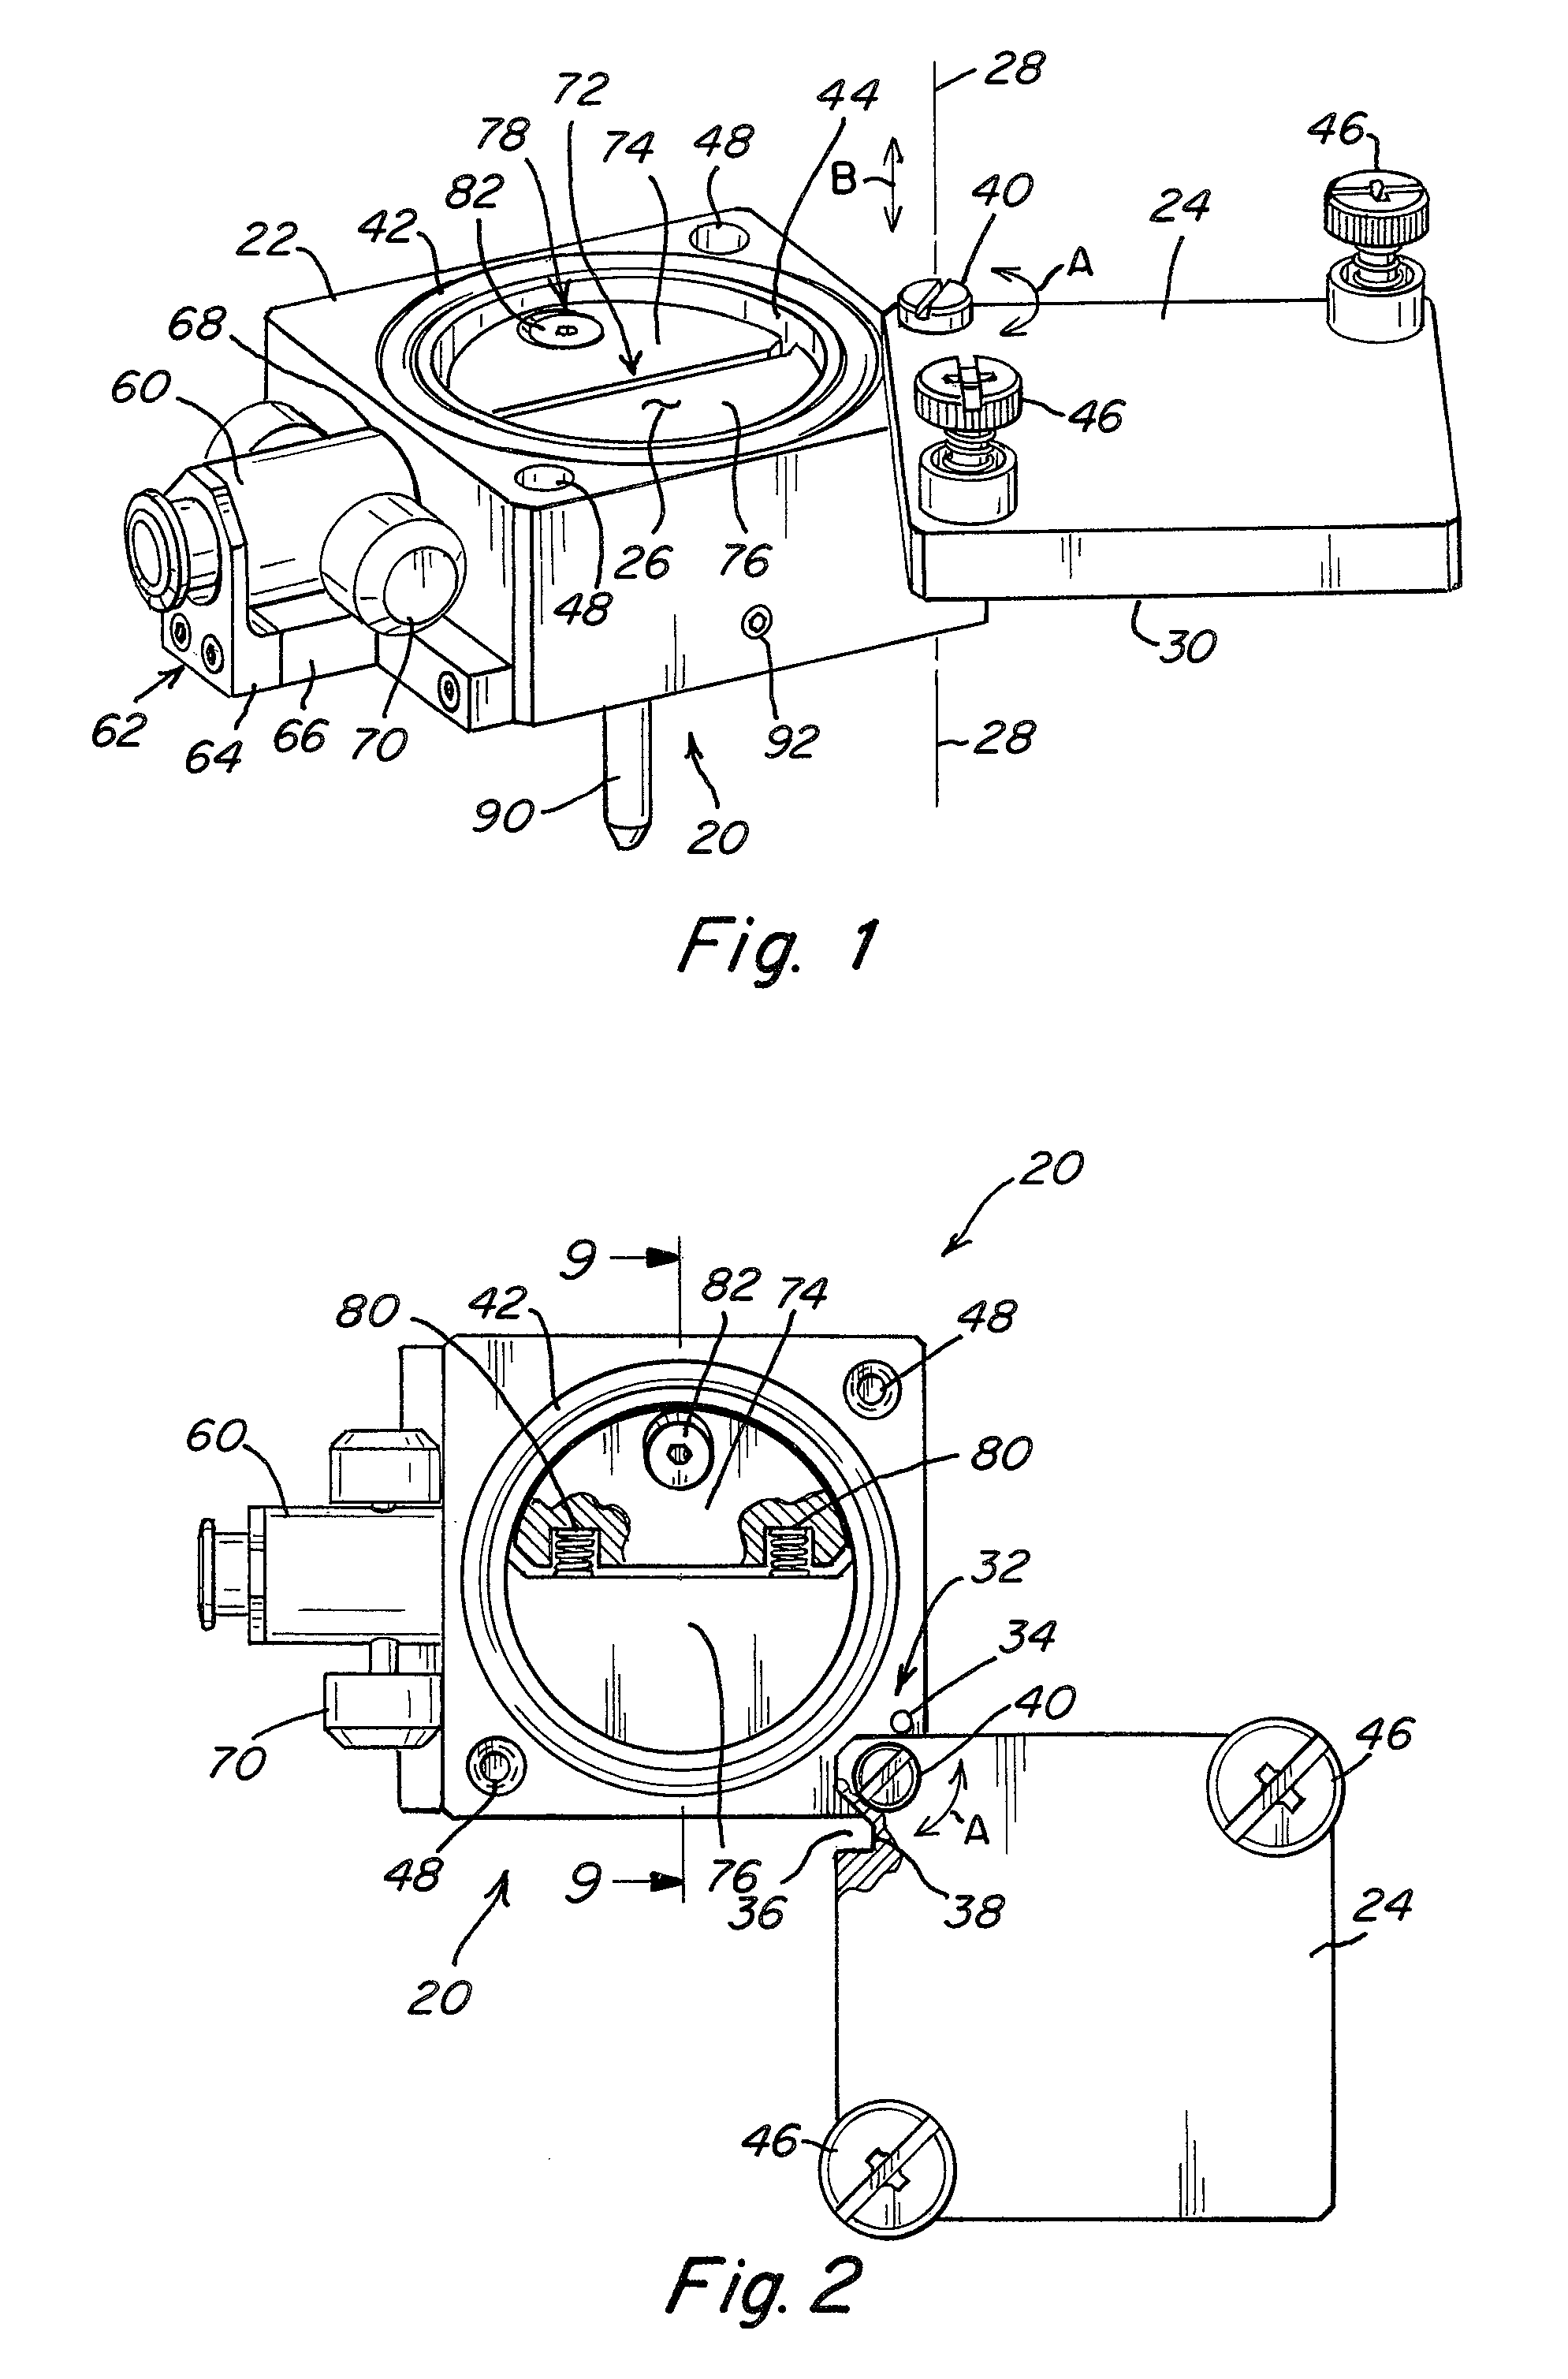 Hermetic sample holder and method for performing microanalysis under controlled atmosphere environment